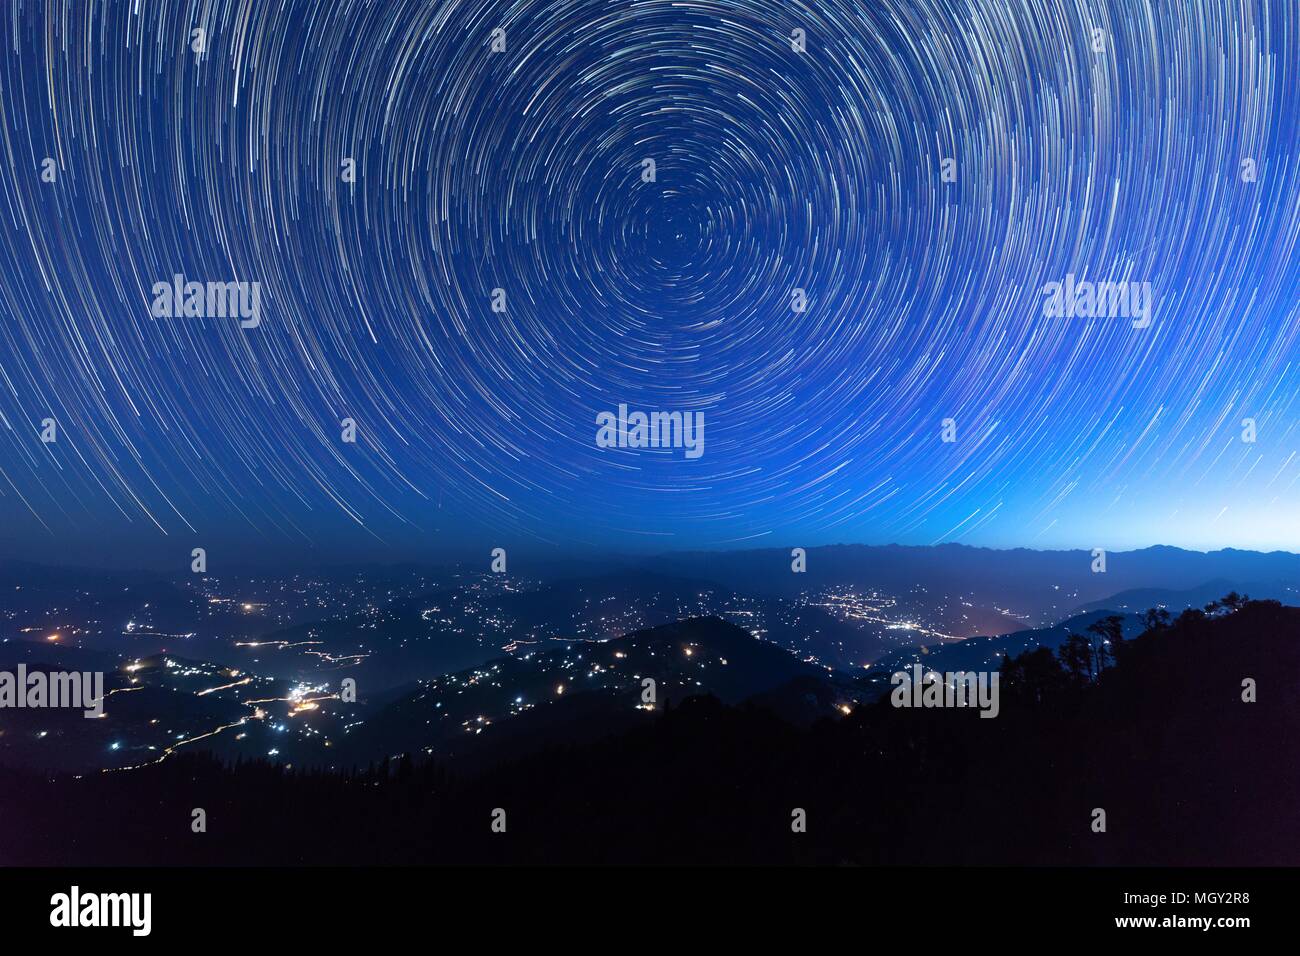 Night sky star trails around the North star with city lights in the background taken from the top of a hill in himalayas Stock Photo